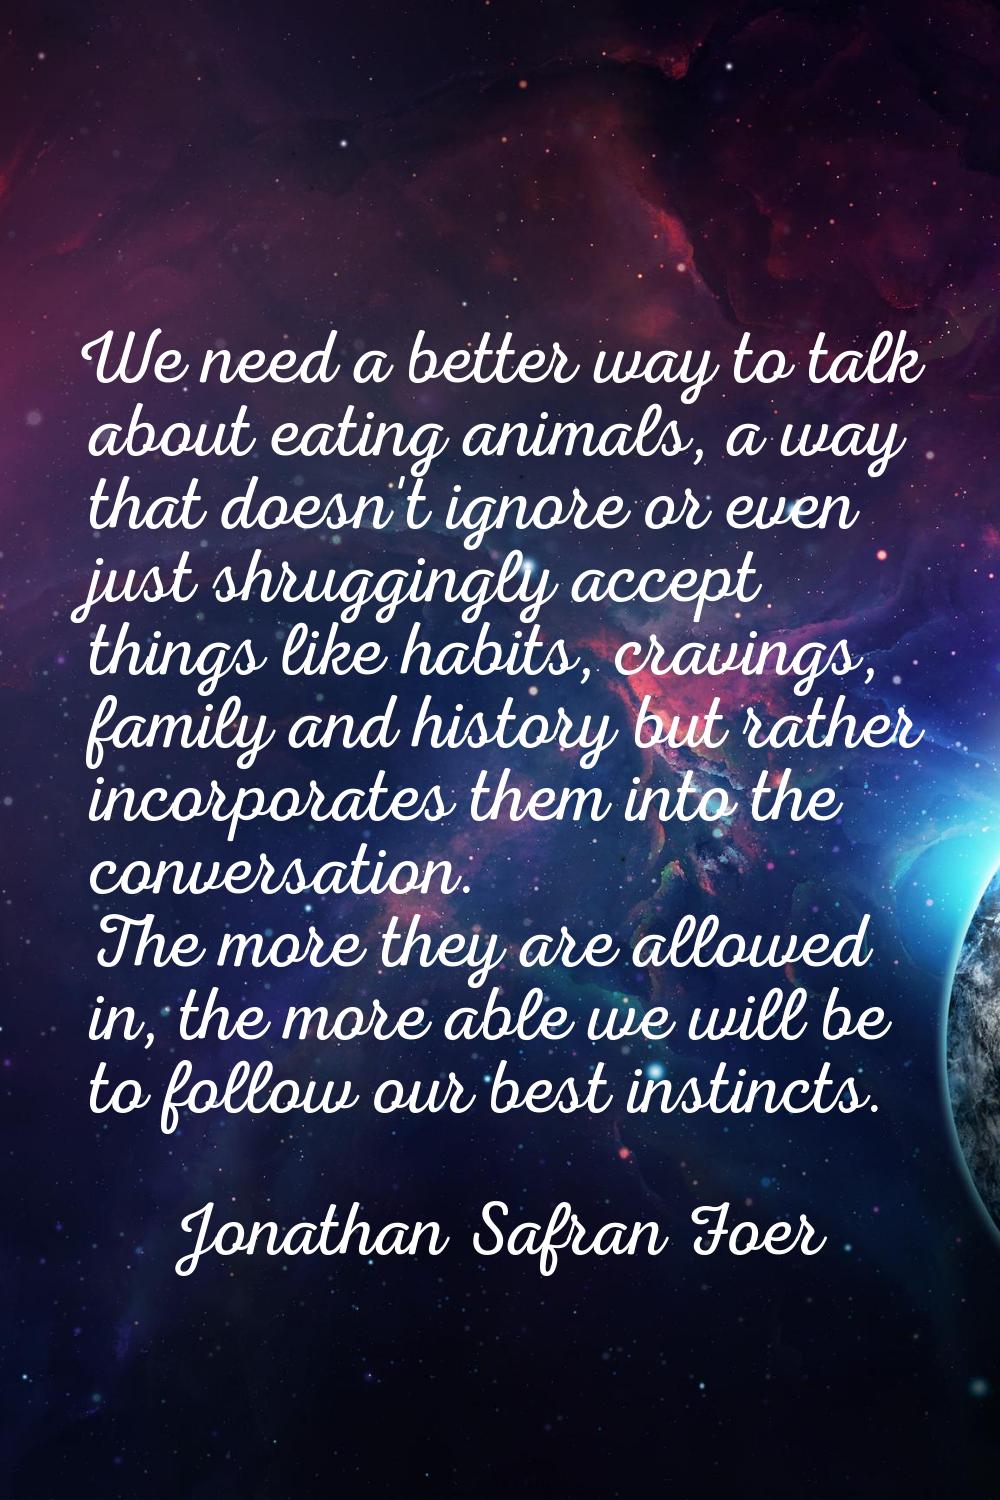 We need a better way to talk about eating animals, a way that doesn't ignore or even just shrugging